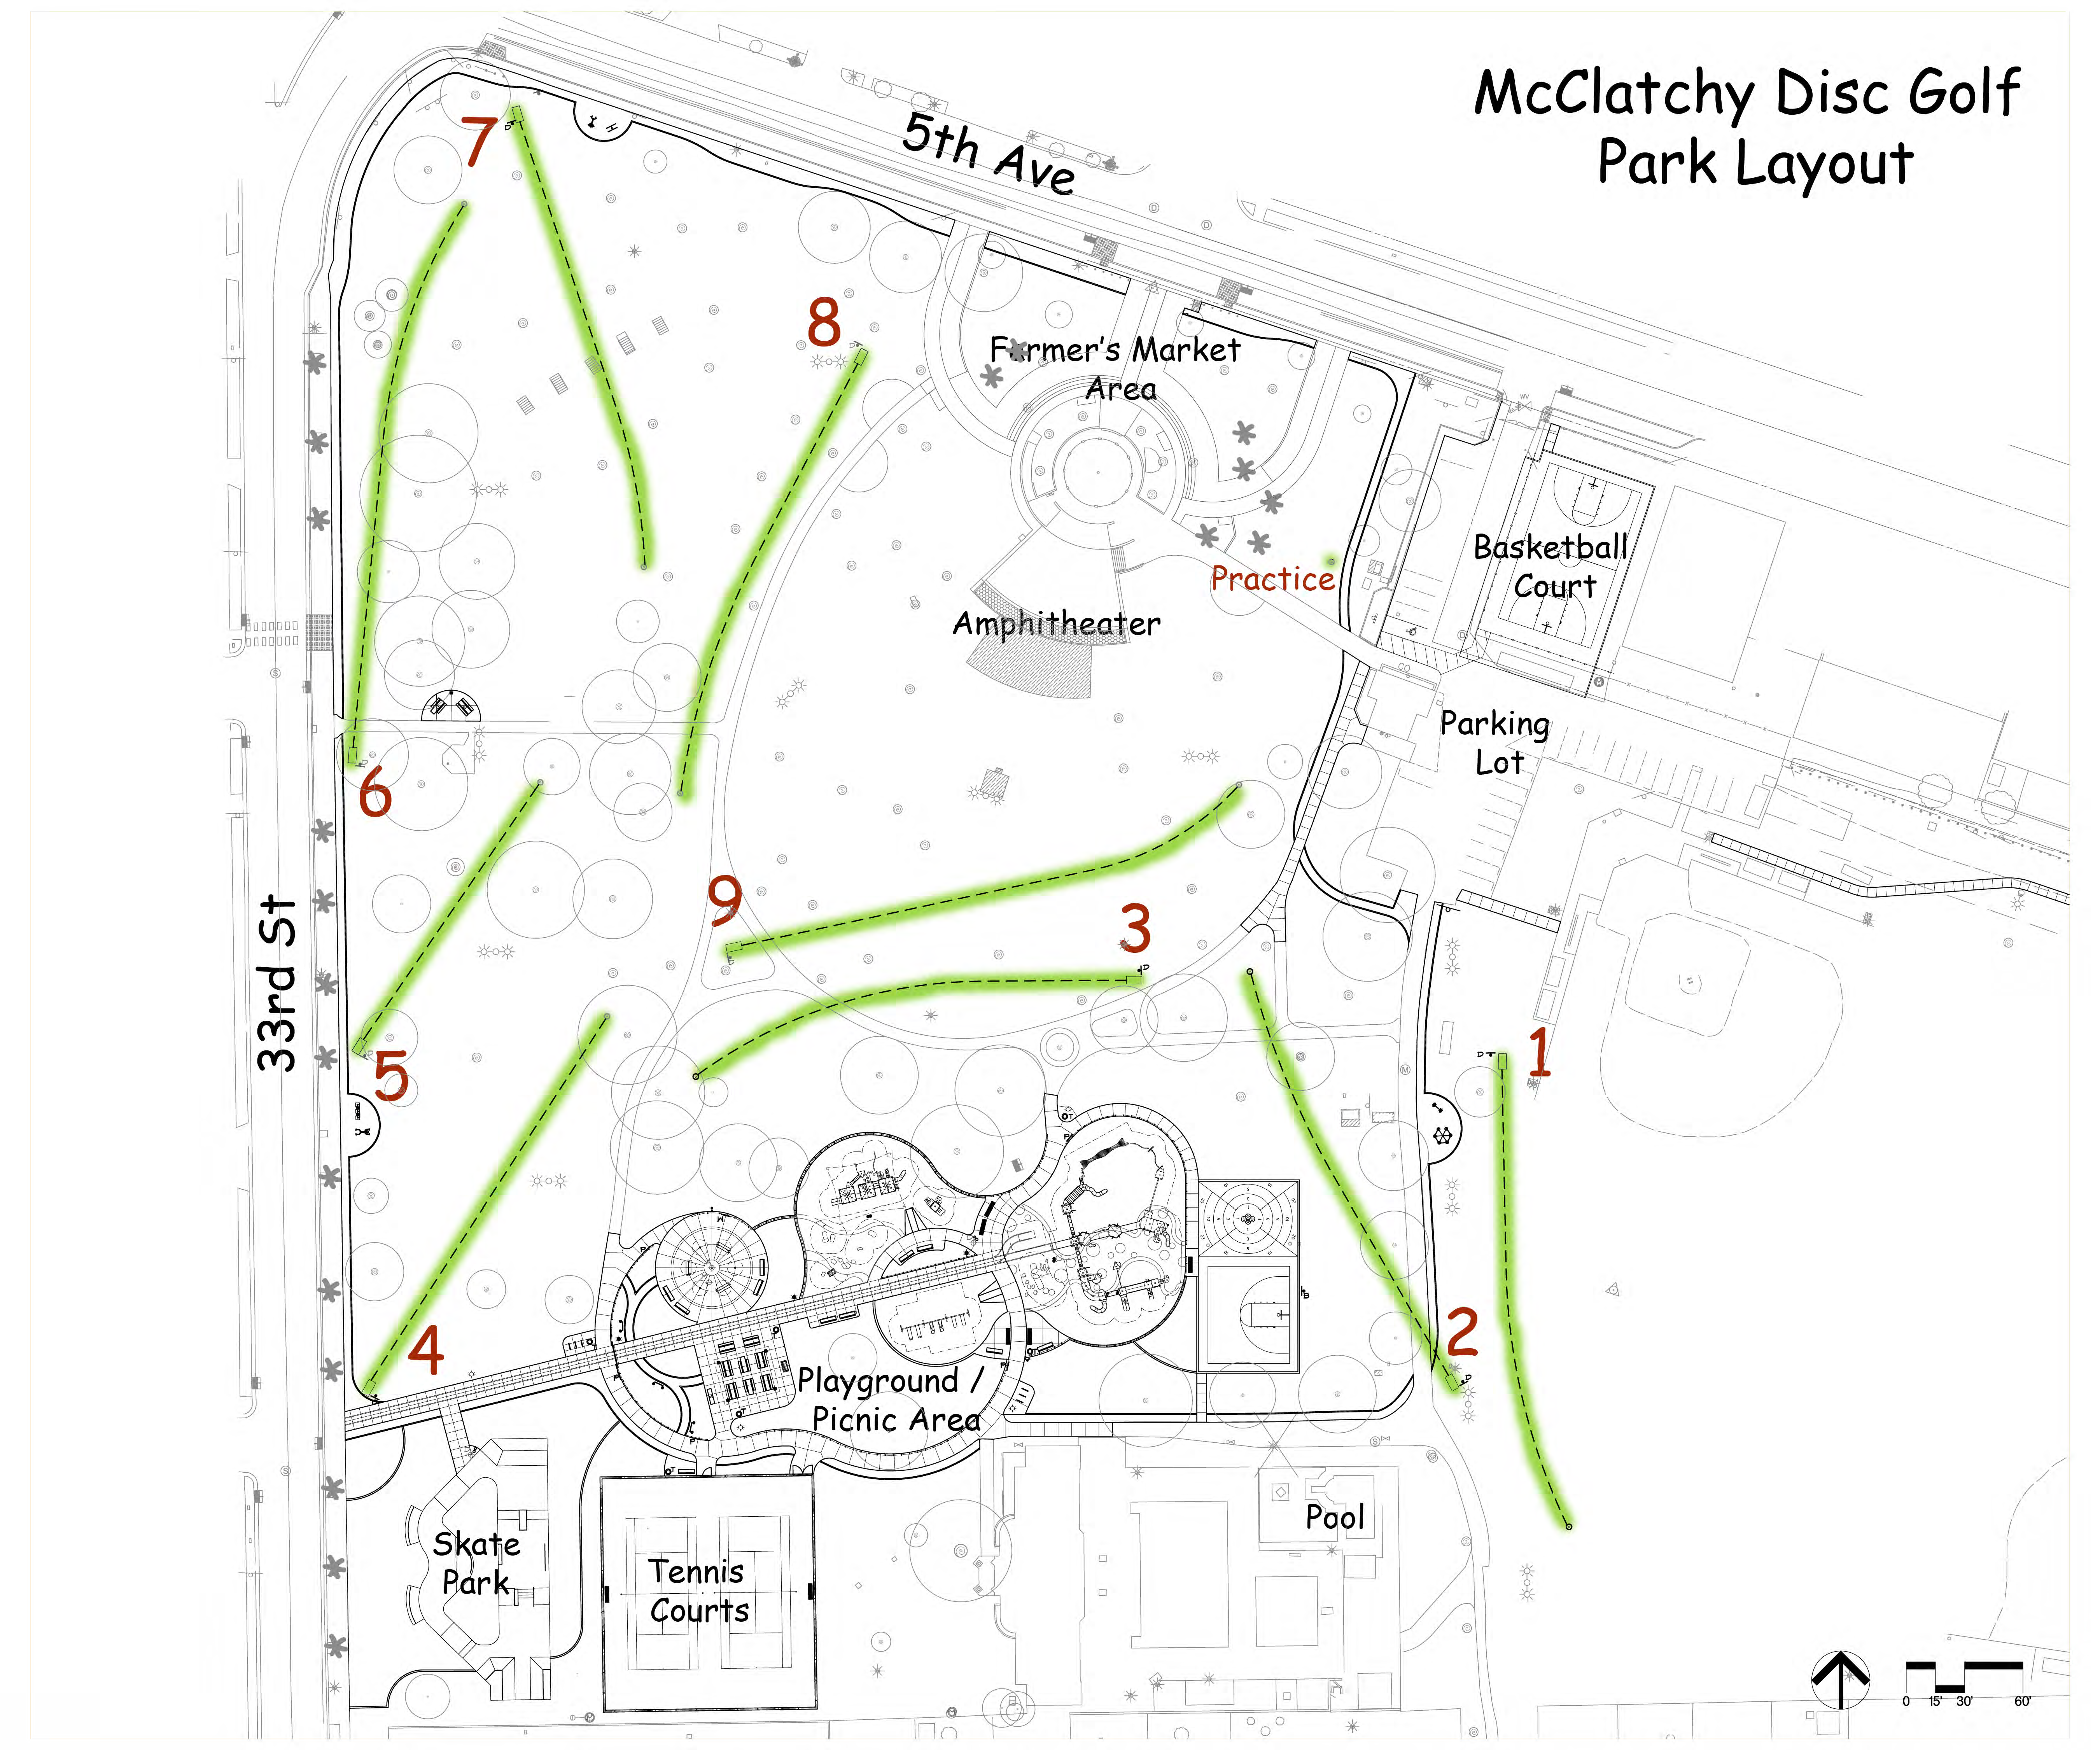 McClatchy Park and Disc Golf Course Grand Opening October 18th 1